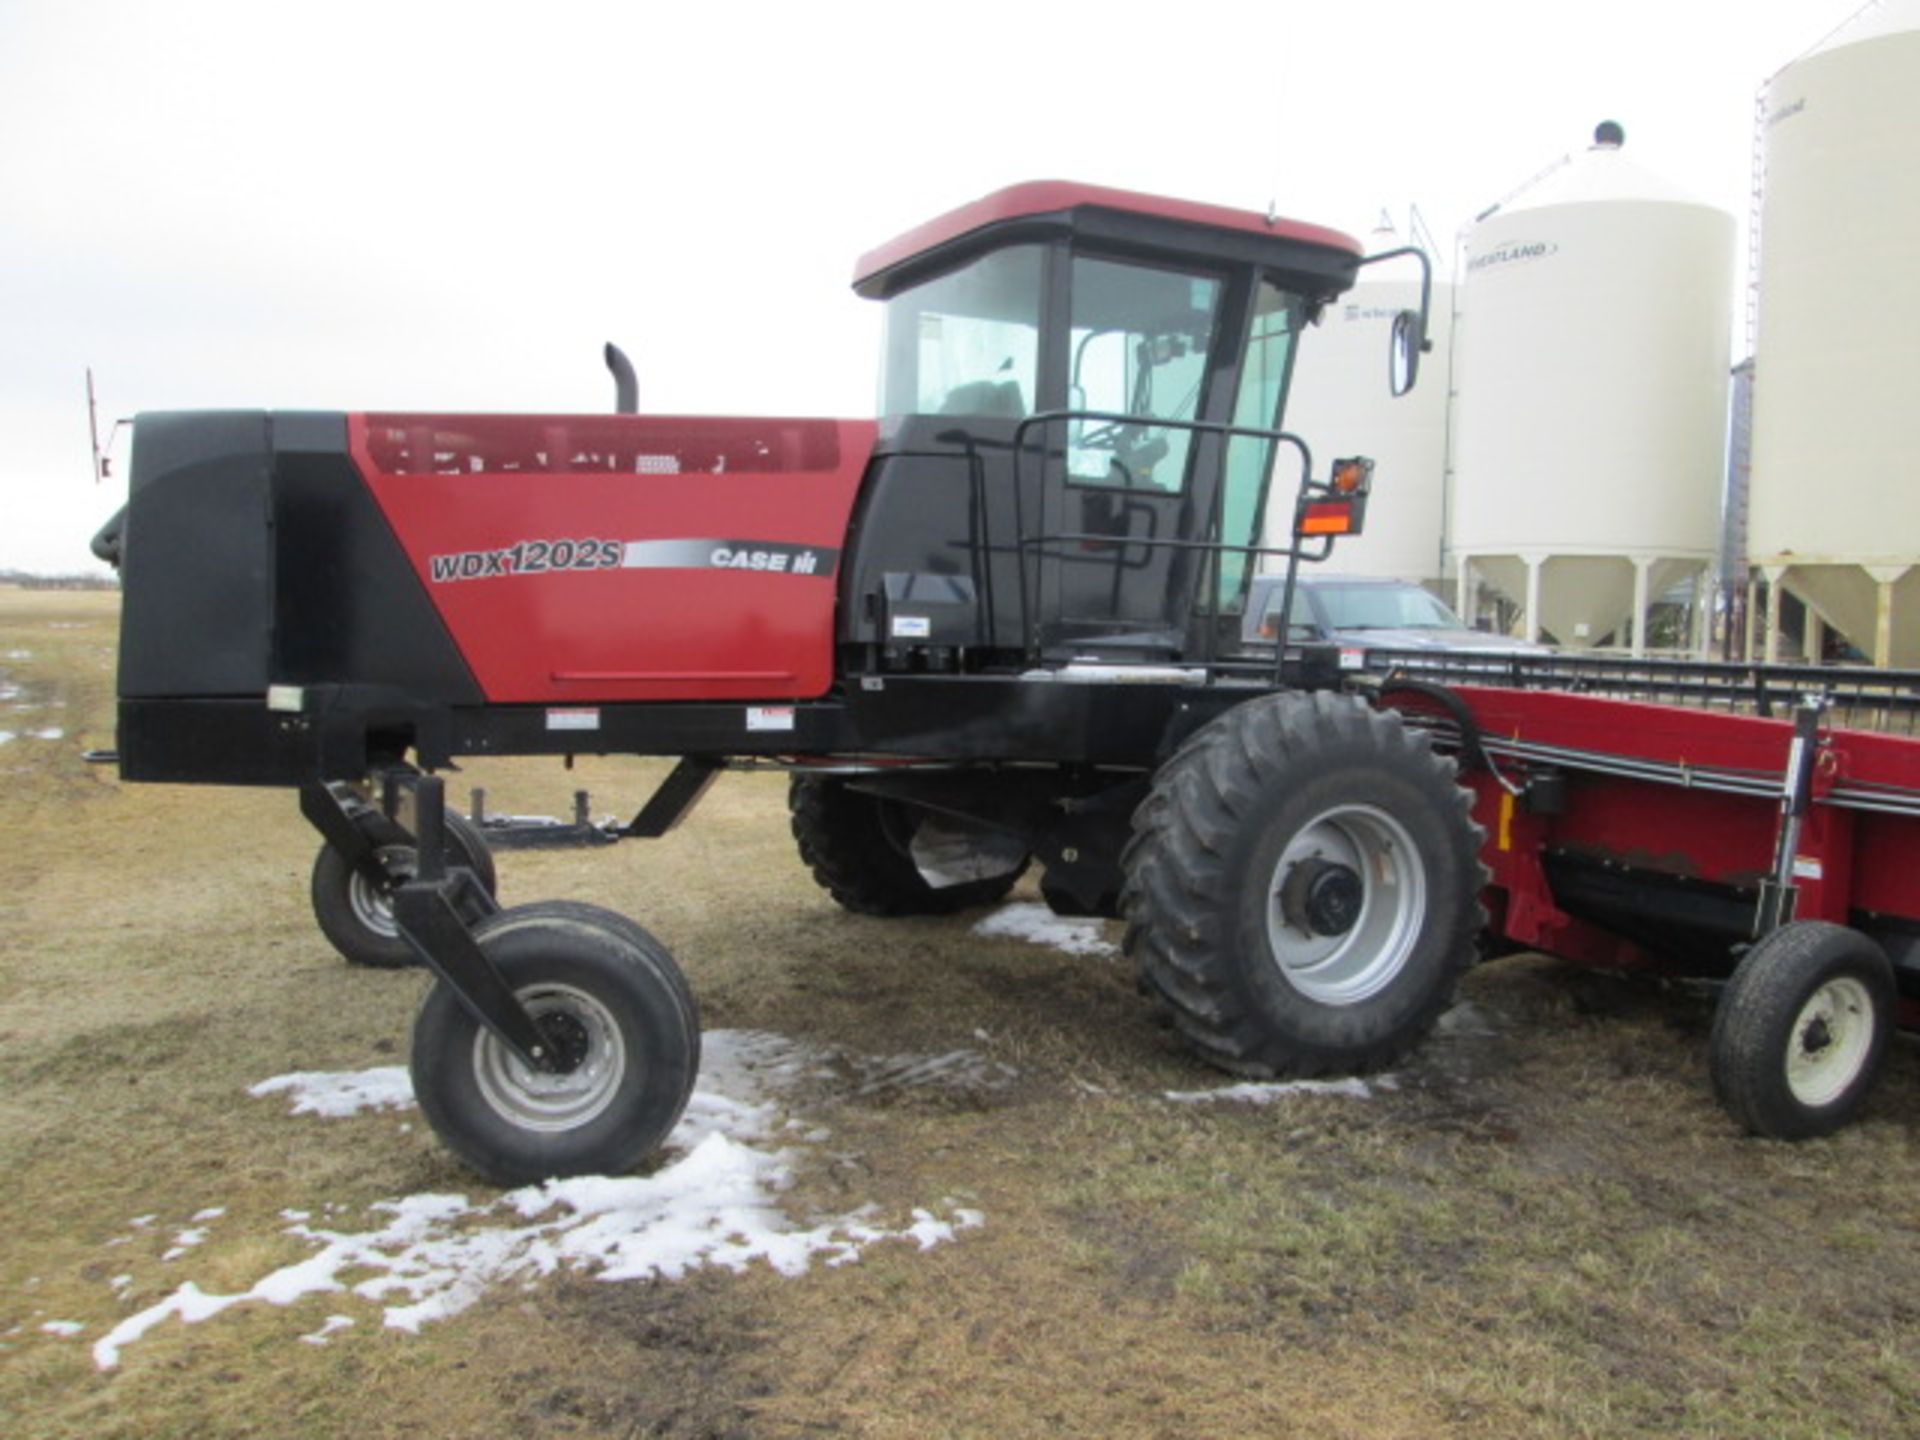 Case WDX 1202 S swather (2005), c/w 30' DHX 302 header (2007), showing 795 eng hr, dbl knife - Image 3 of 32